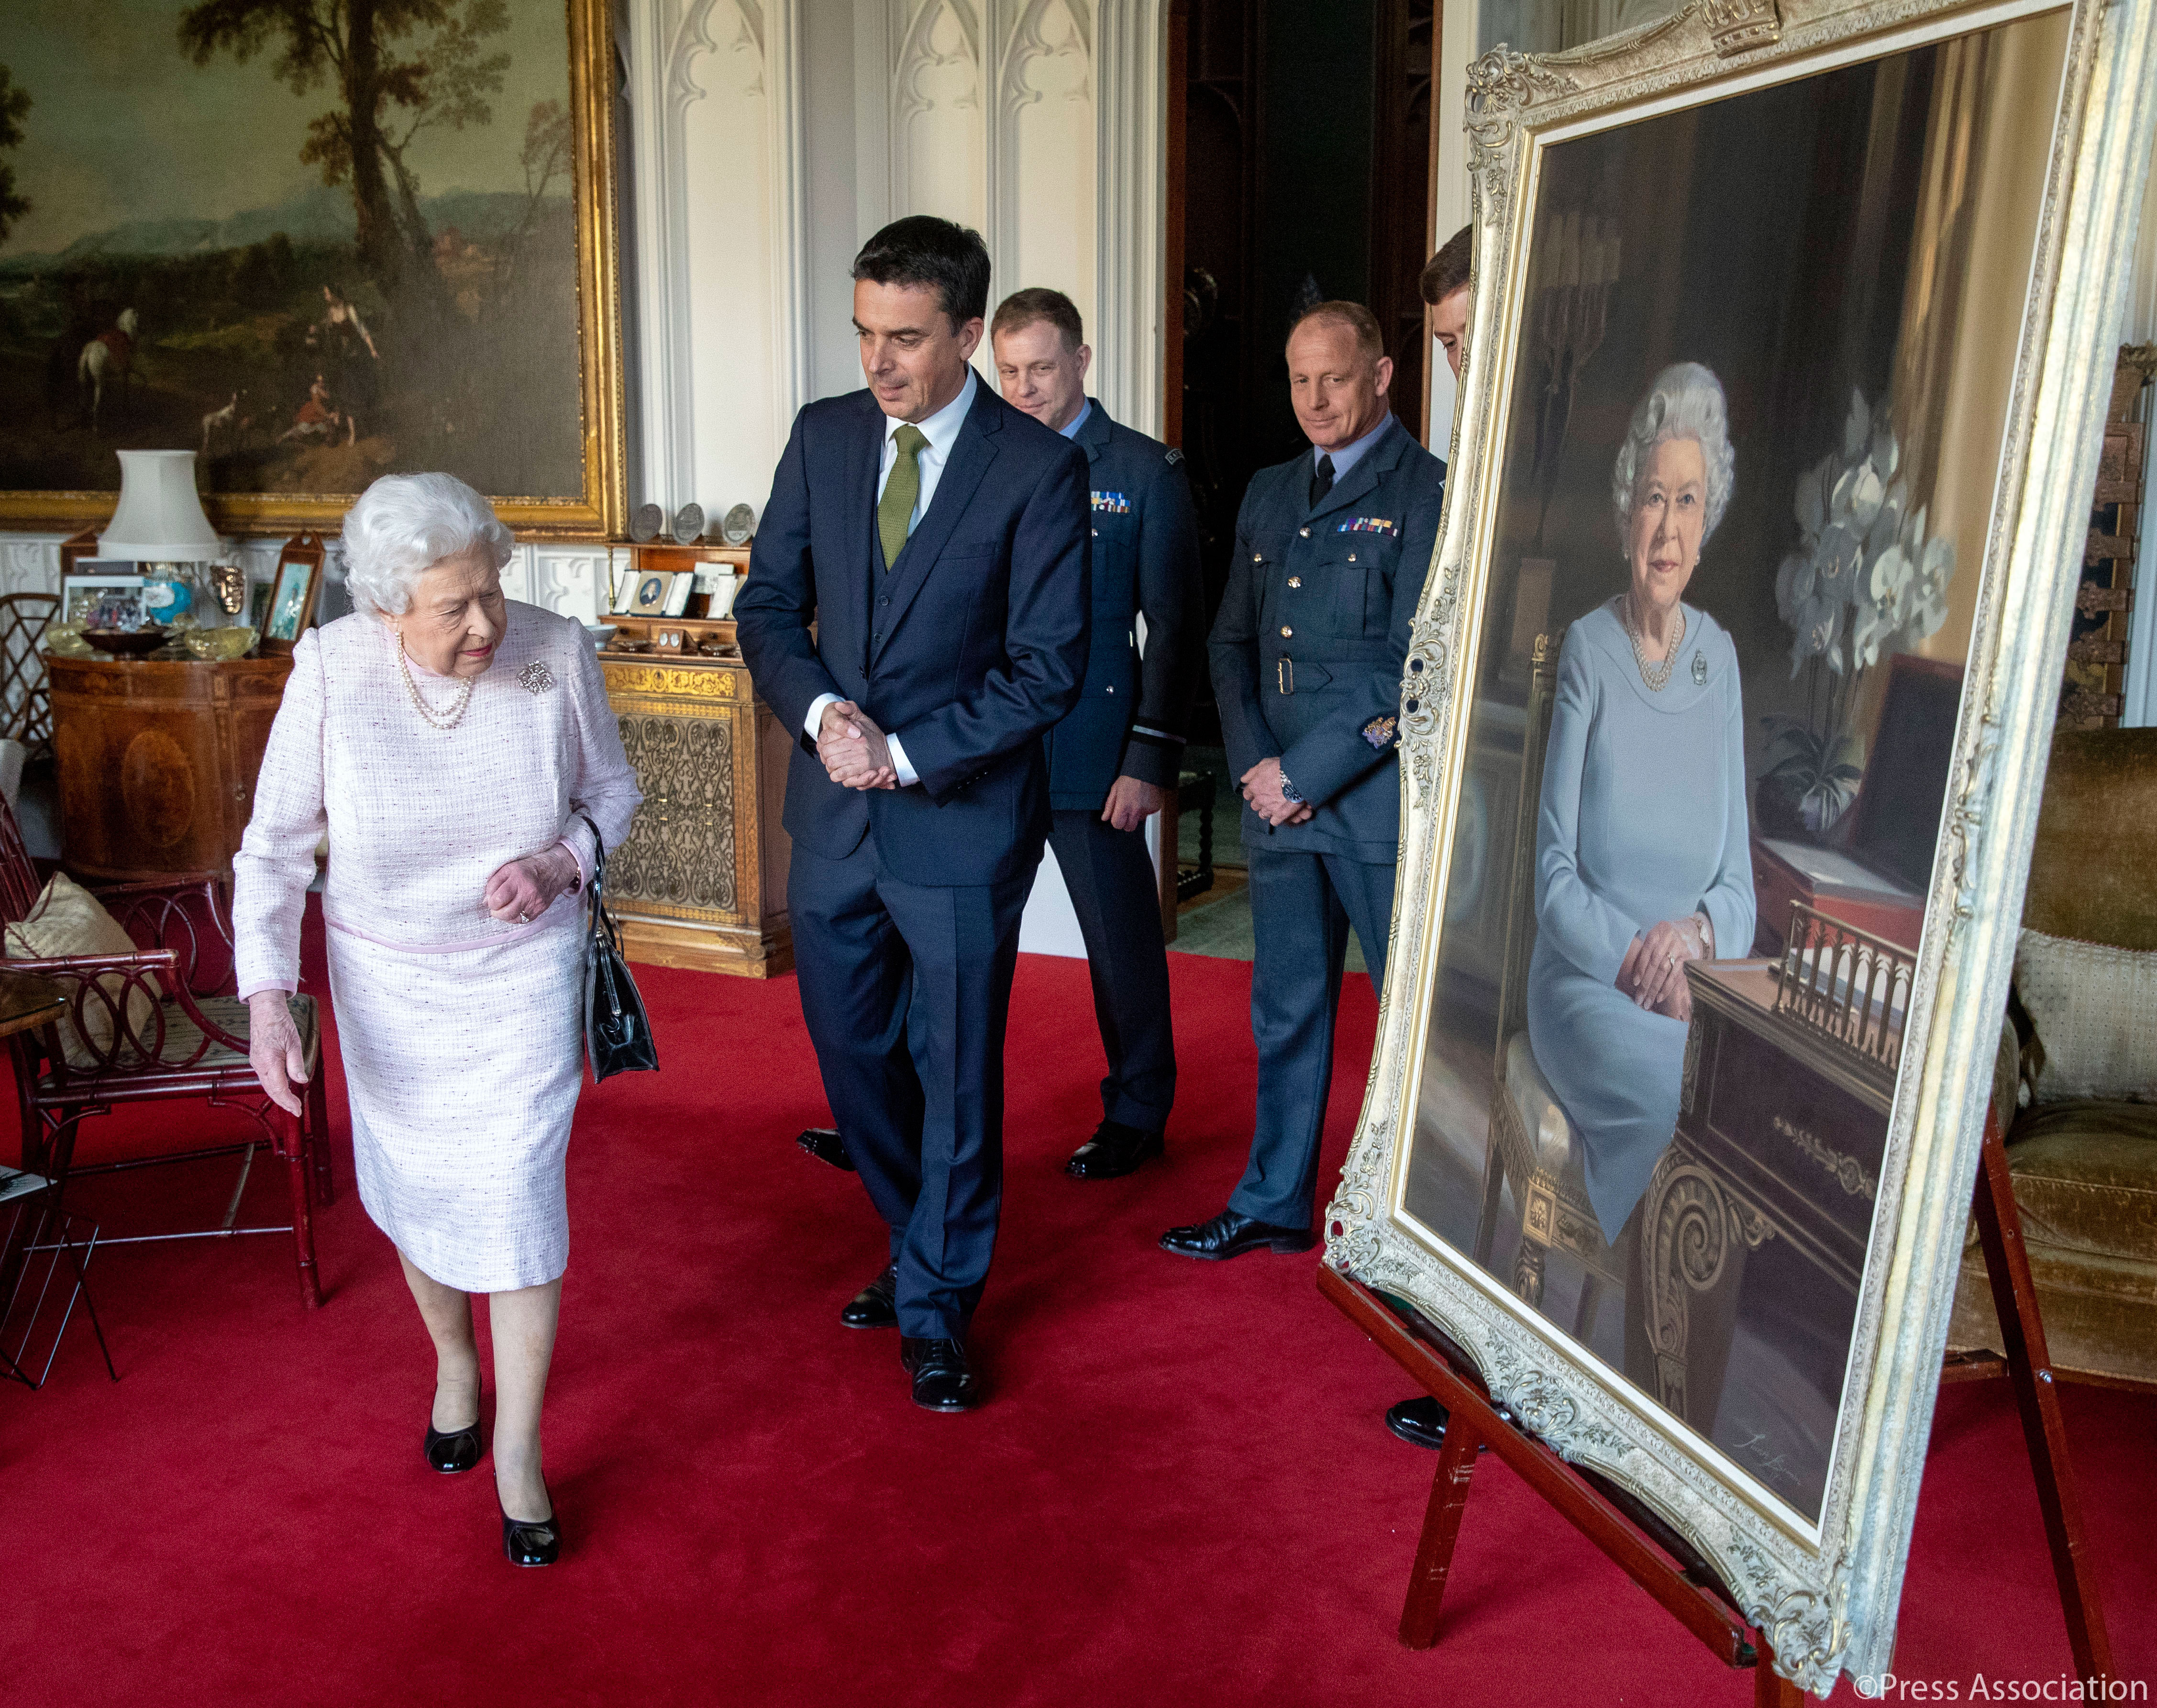 The The Queen today viewed a new portrait at Windsor Castle, commissioned by the RAF Regiment to celebrate its 75th anniversary.